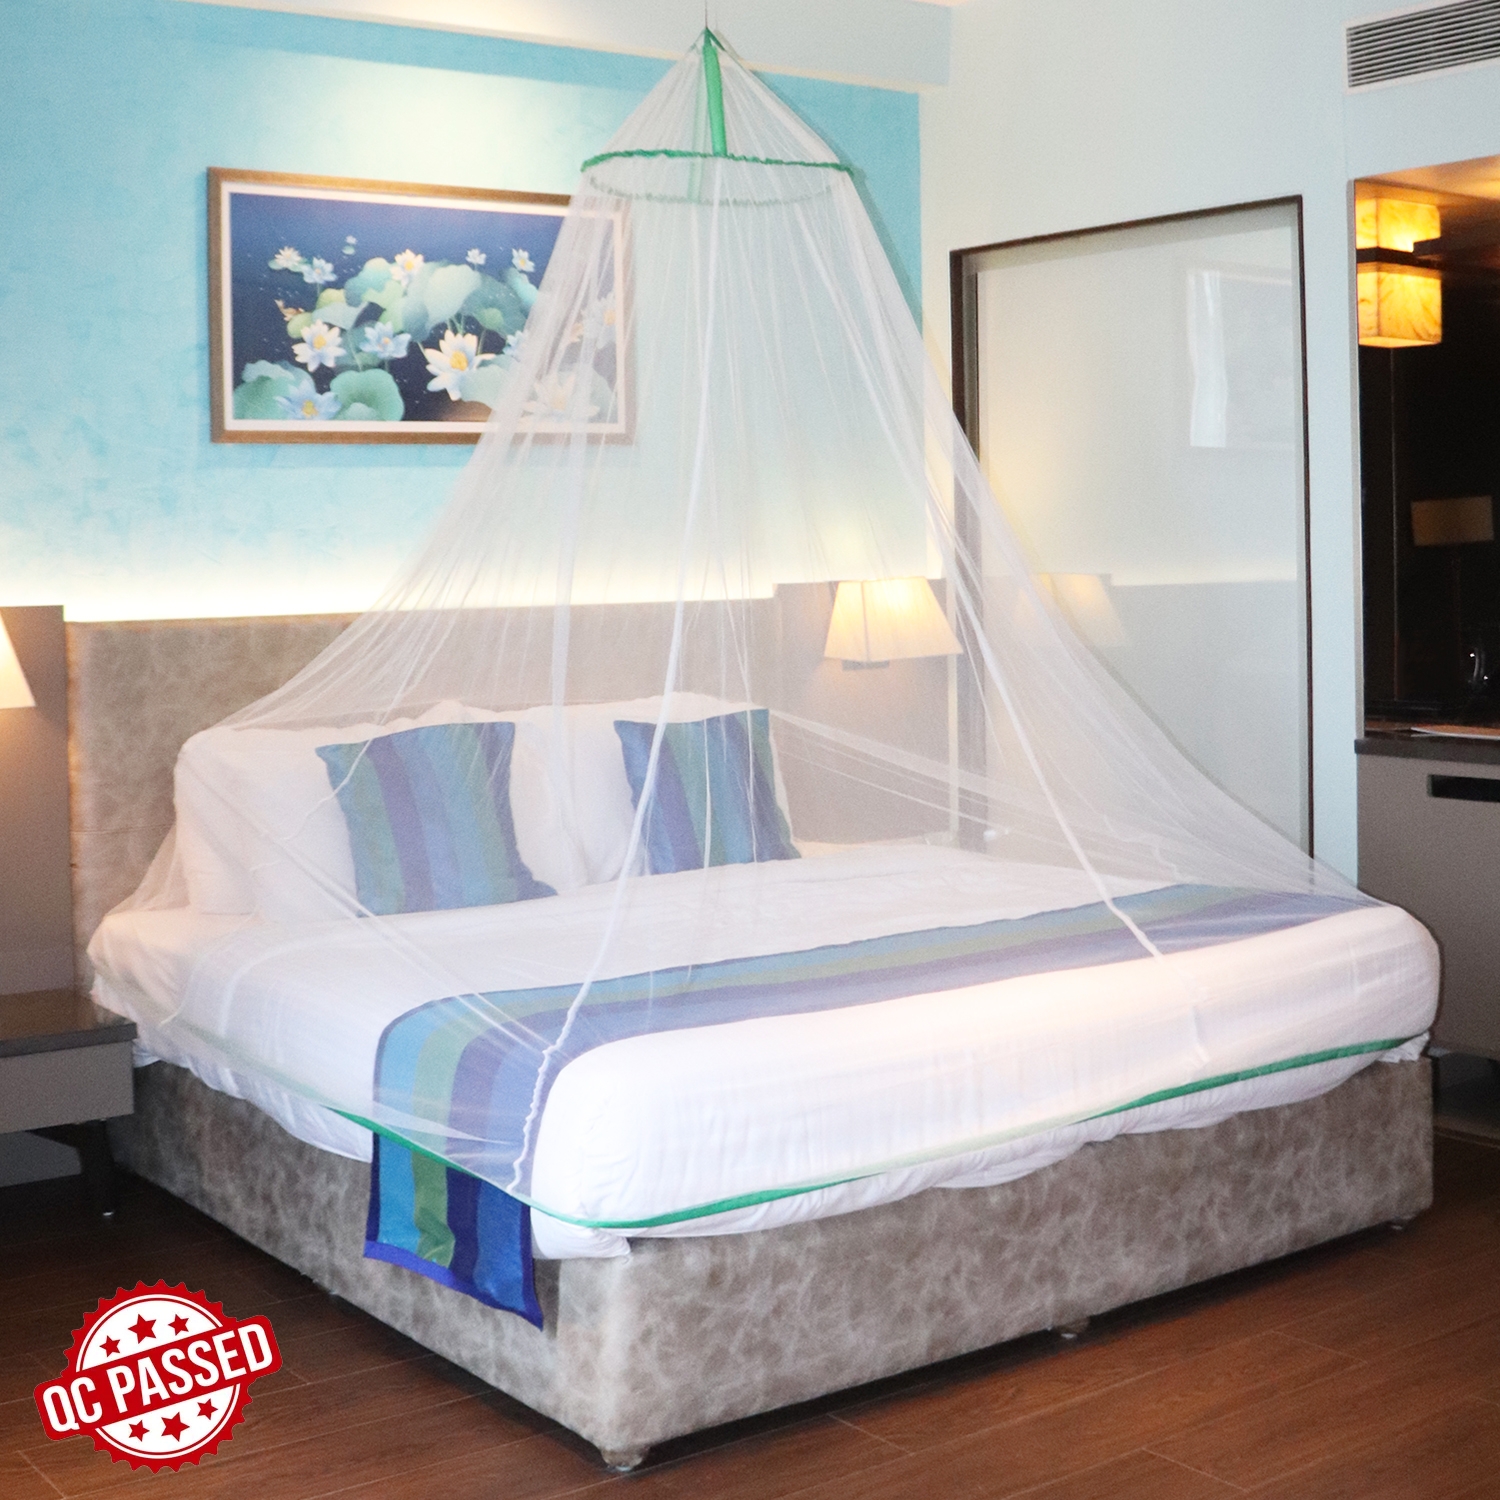 SILVER SHINE | Mosquito Net for Double Bed, King-Size, Round Ceiling Hanging Foldable Polyester Net White And Green